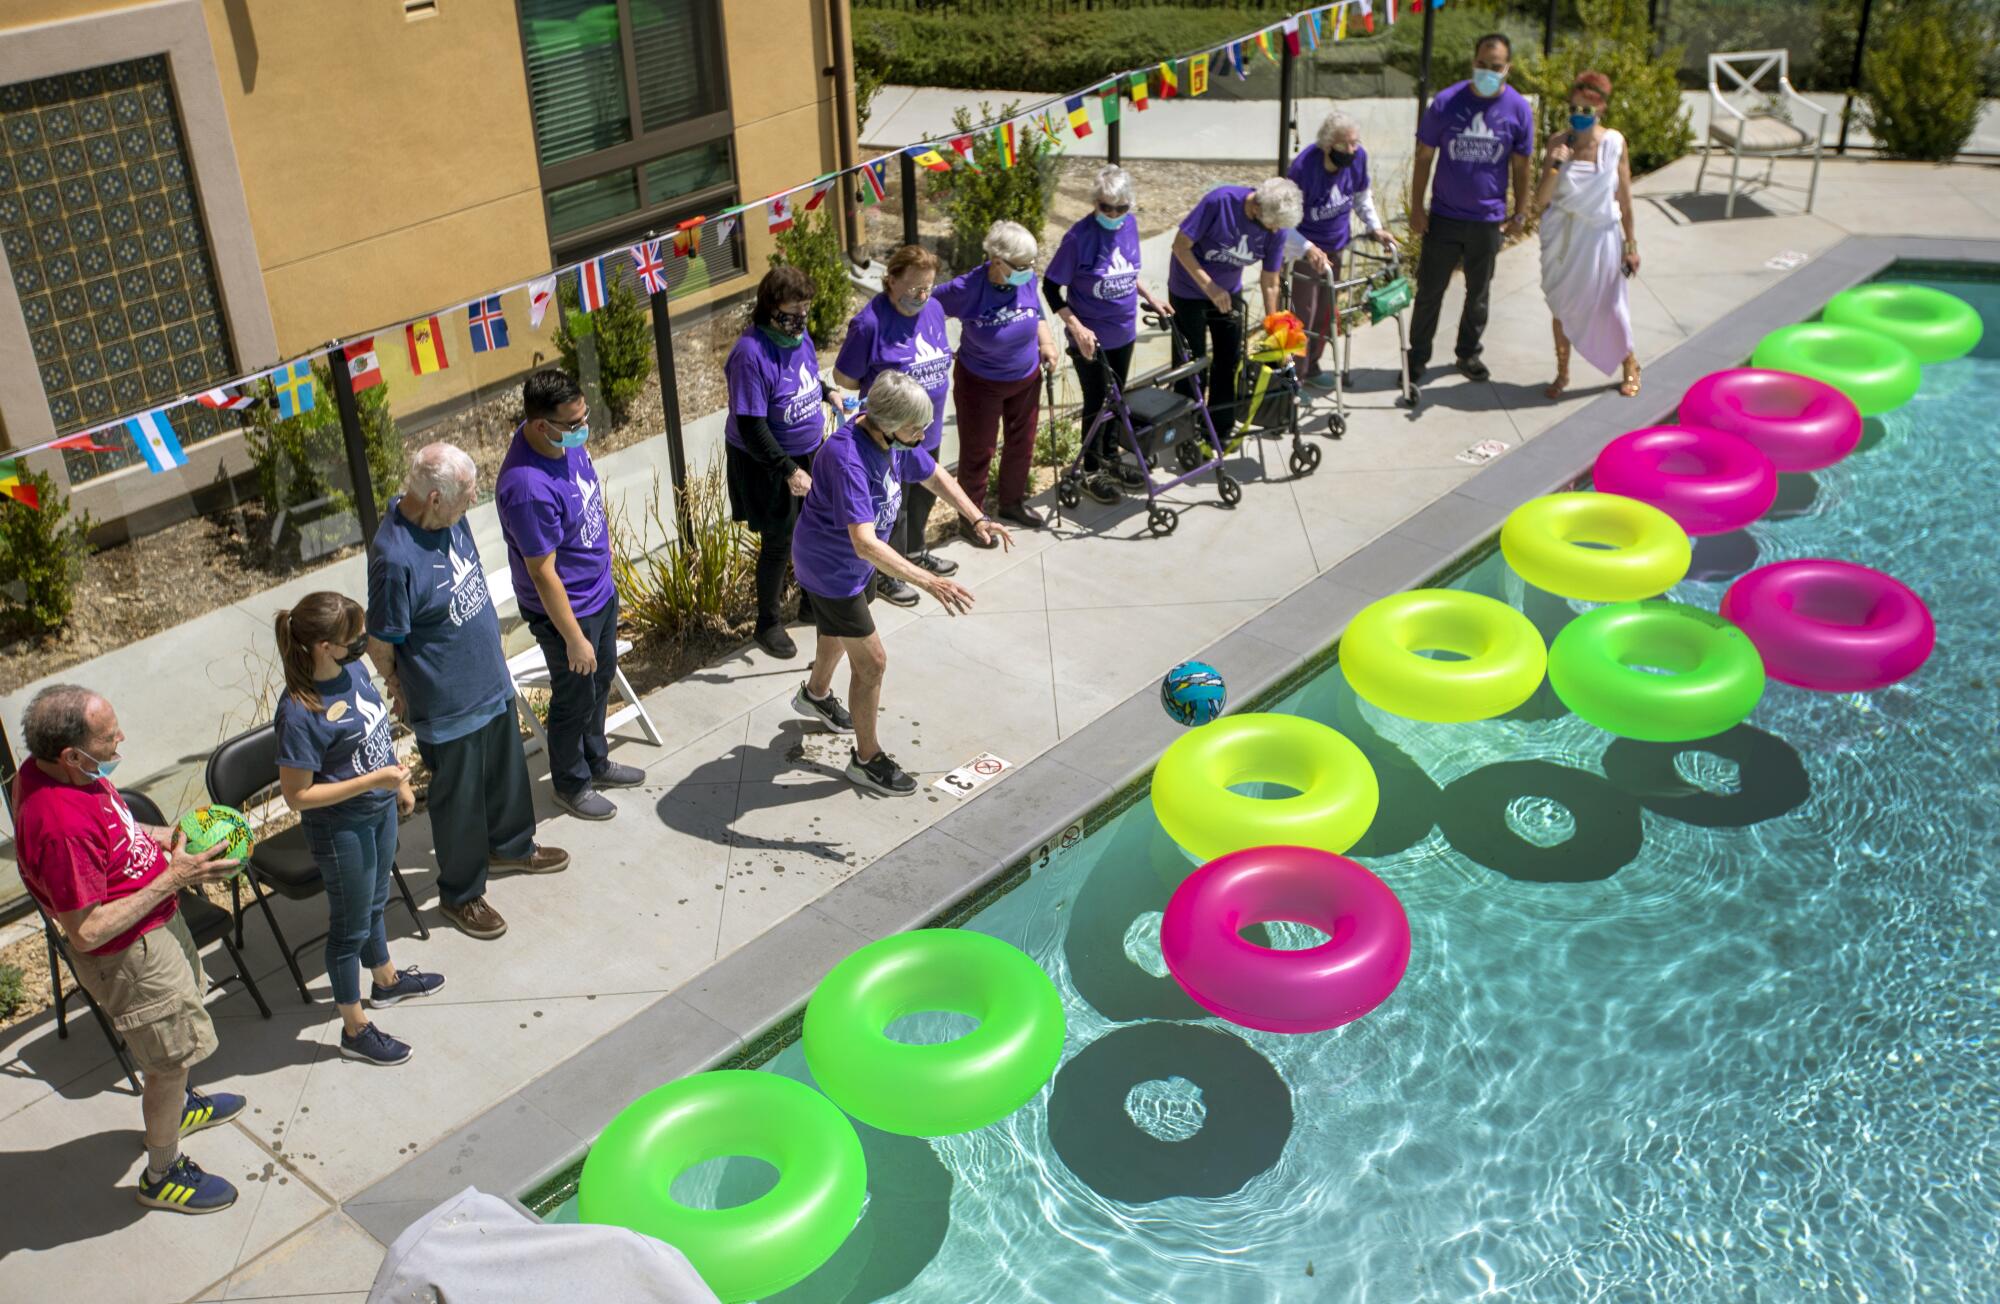 People, many in matching purple shirts, line a swimming pool filled with colorful flotation rings